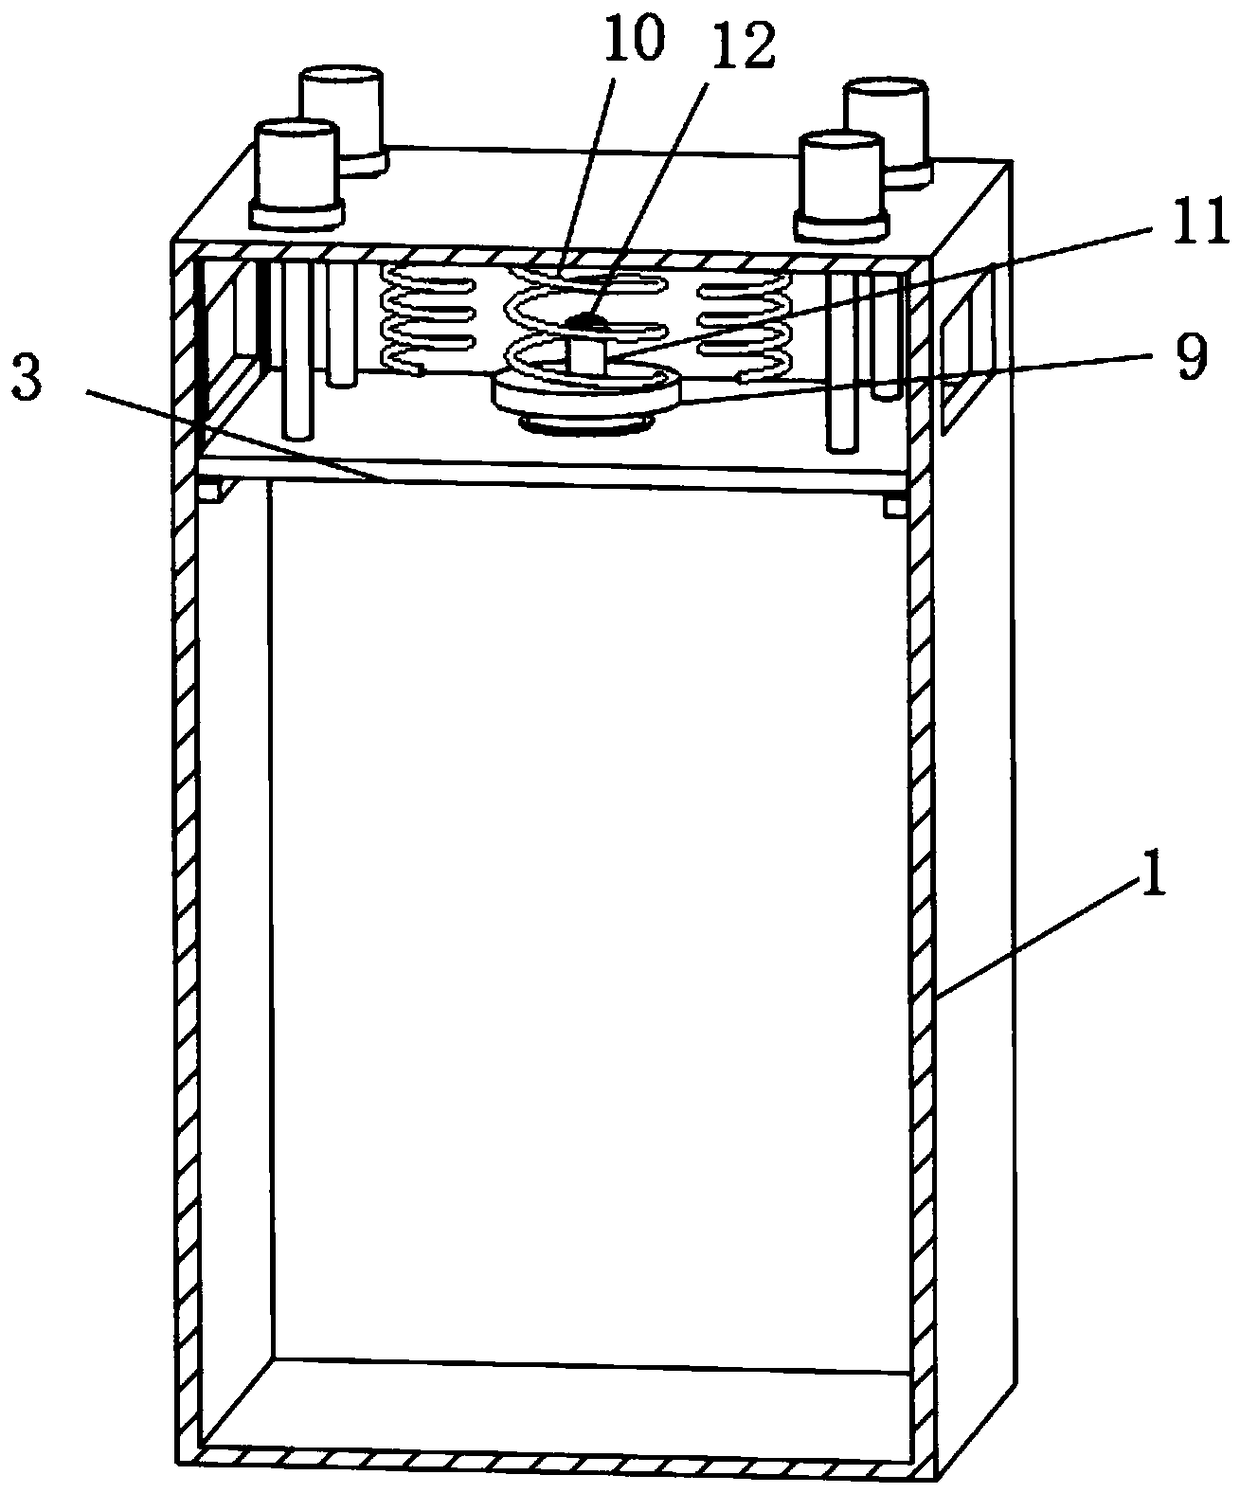 Anti-explosion device and method for top of switch cabinet